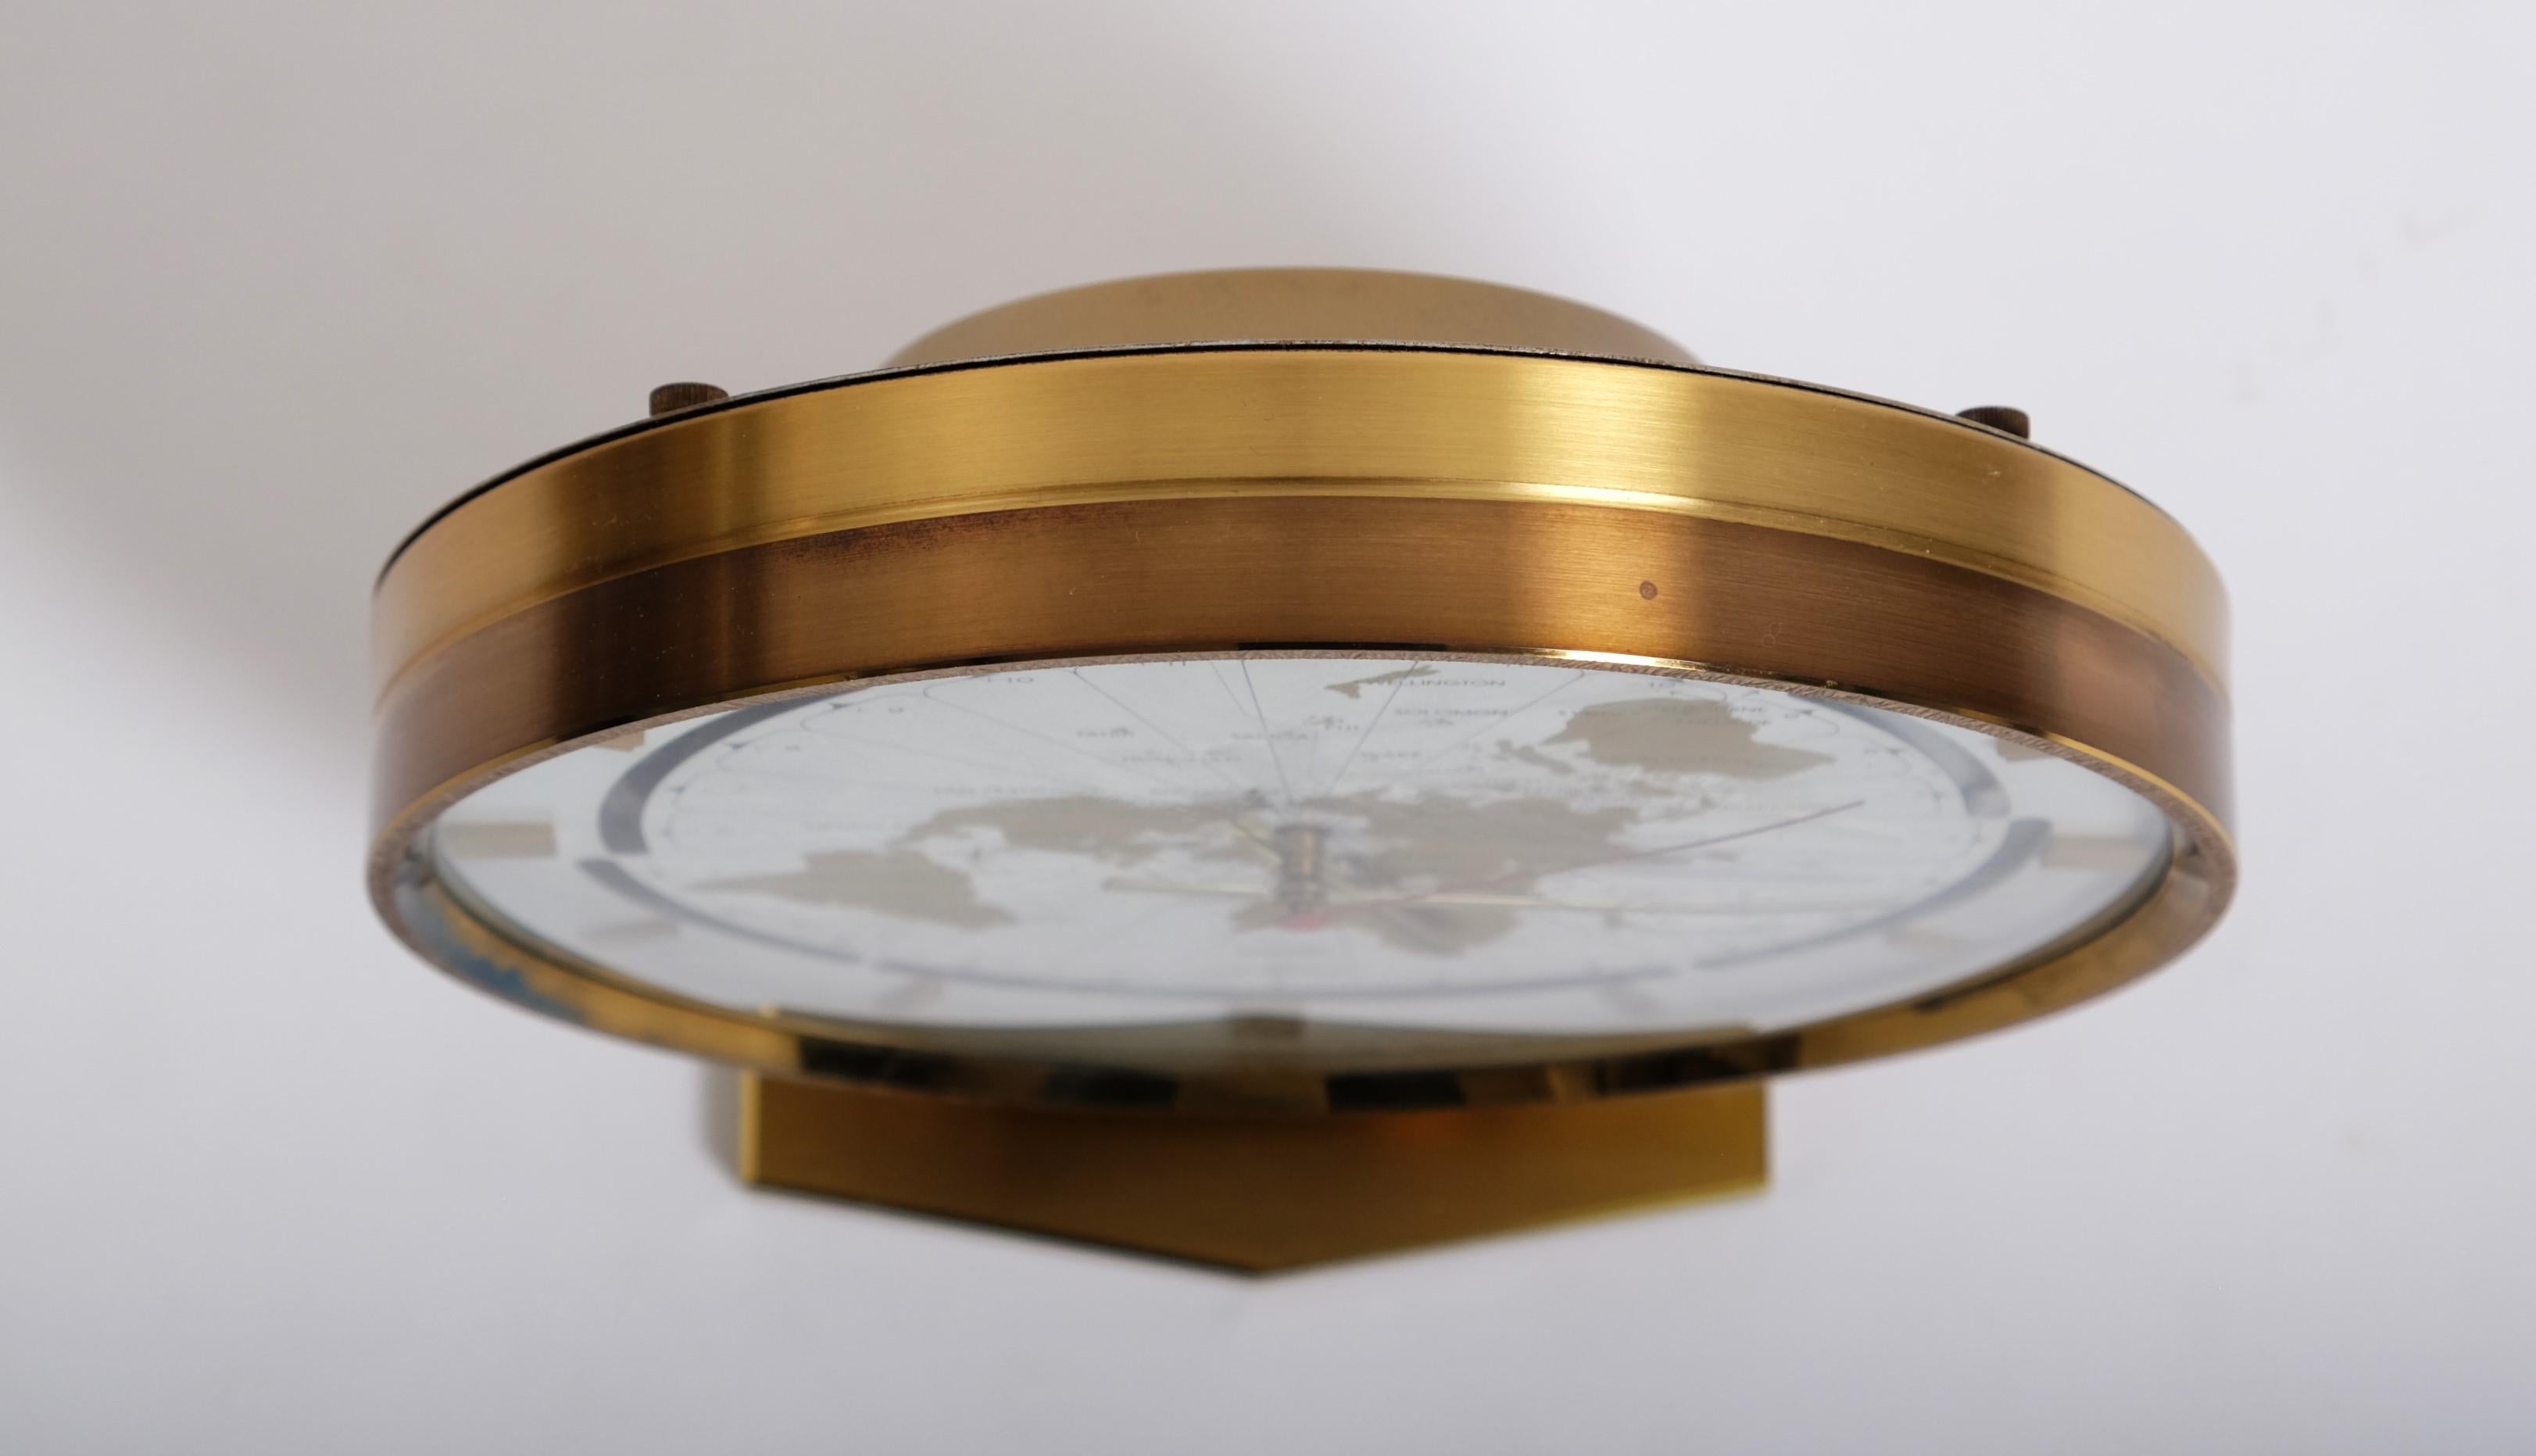 Large Brass Table World Time Zone Clock by Kundo / Kieninger & Obergfell, 1970s For Sale 8